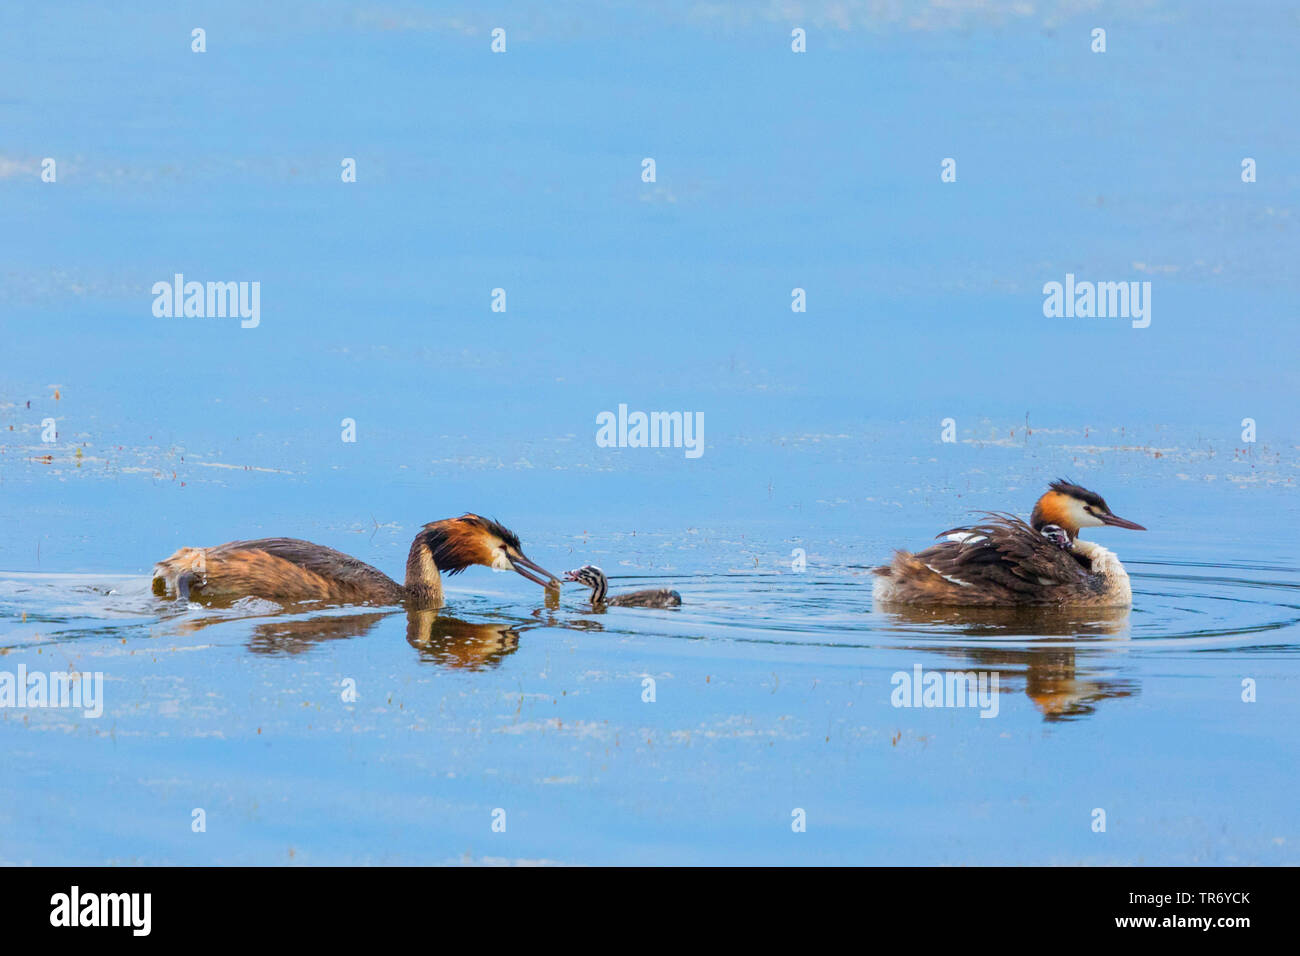 great crested grebe (Podiceps cristatus), pair with young birds, young bird be fed on fish, Germany, Bavaria Stock Photo